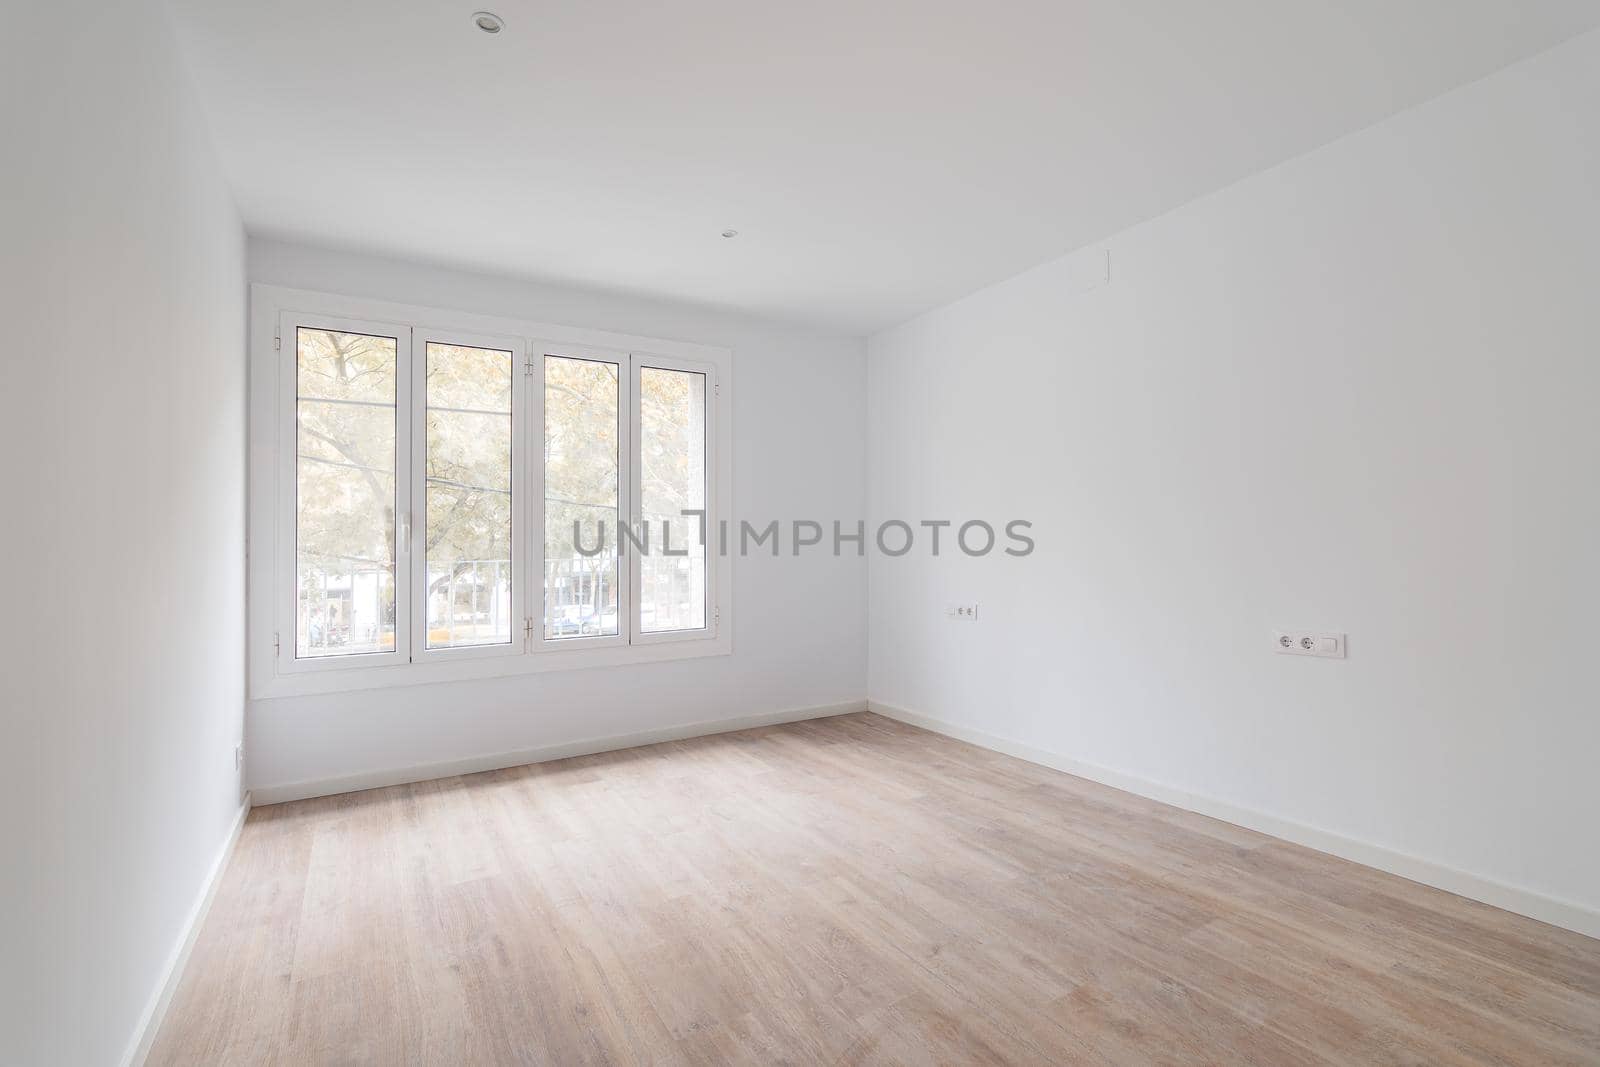 Empty dusted room after renovation with white walls, windows and wooden floor.